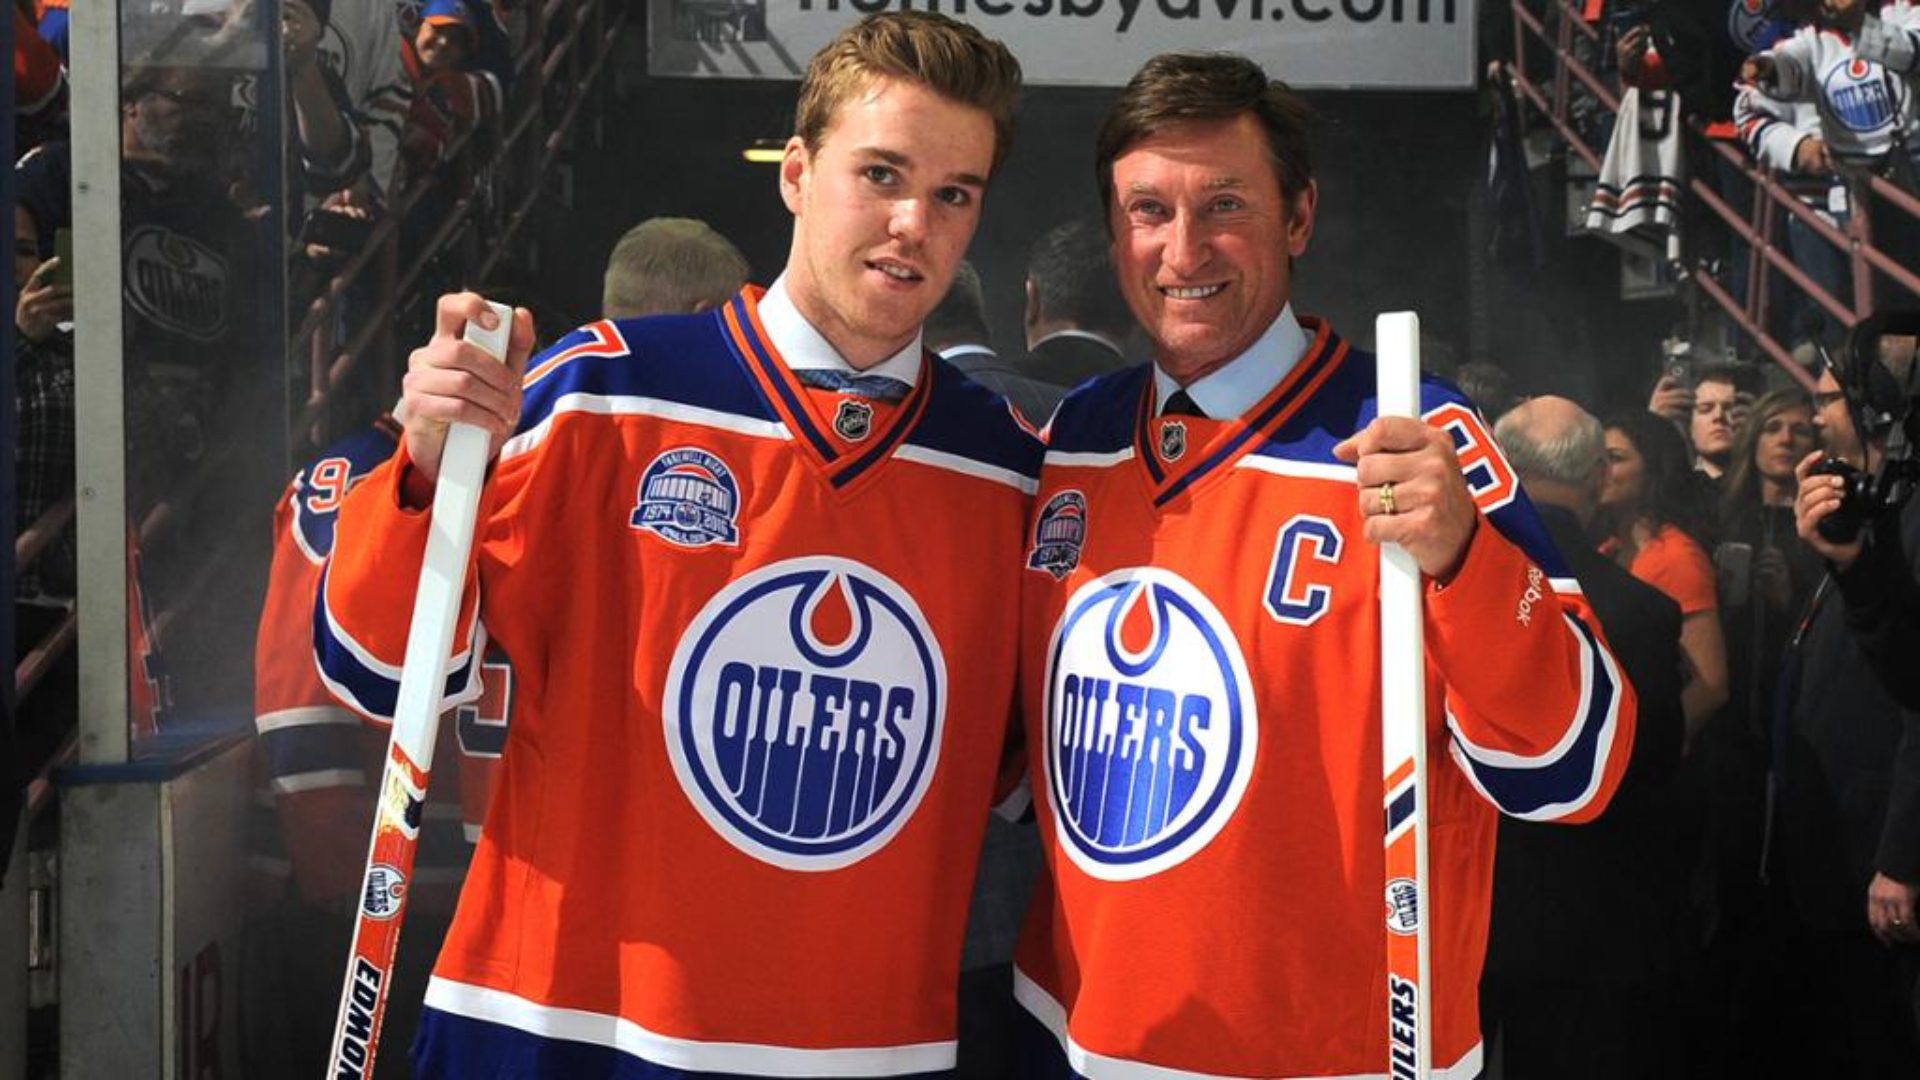 Conor McDavid and Wayne Gretzky have become betting company ambassadors but do not want to comment on it